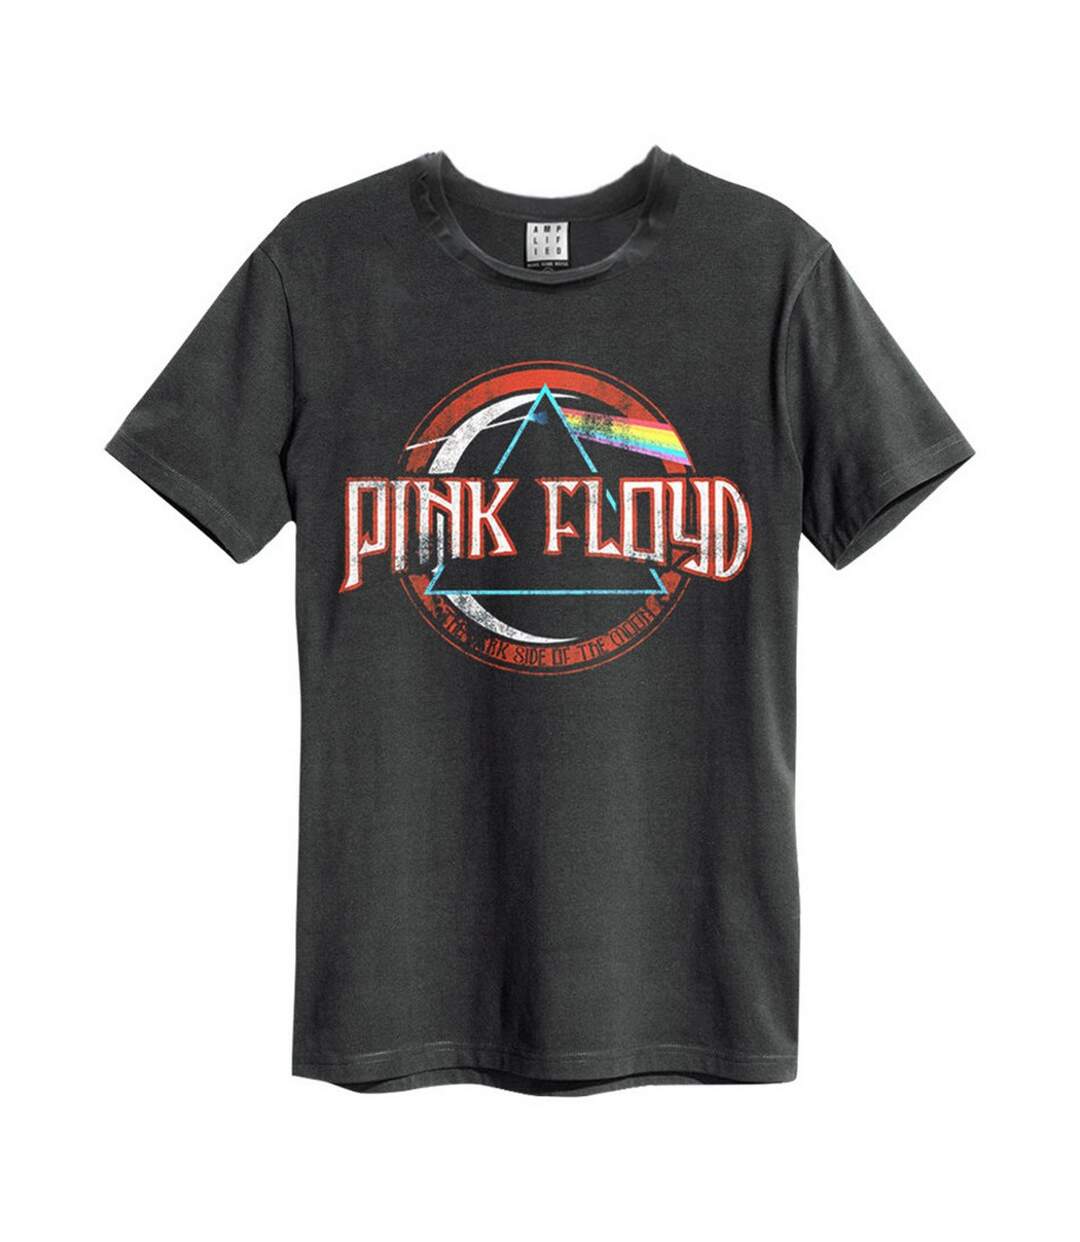 Amplified Mens On The Run Pink Floyd T-Shirt (Charcoal/Red)